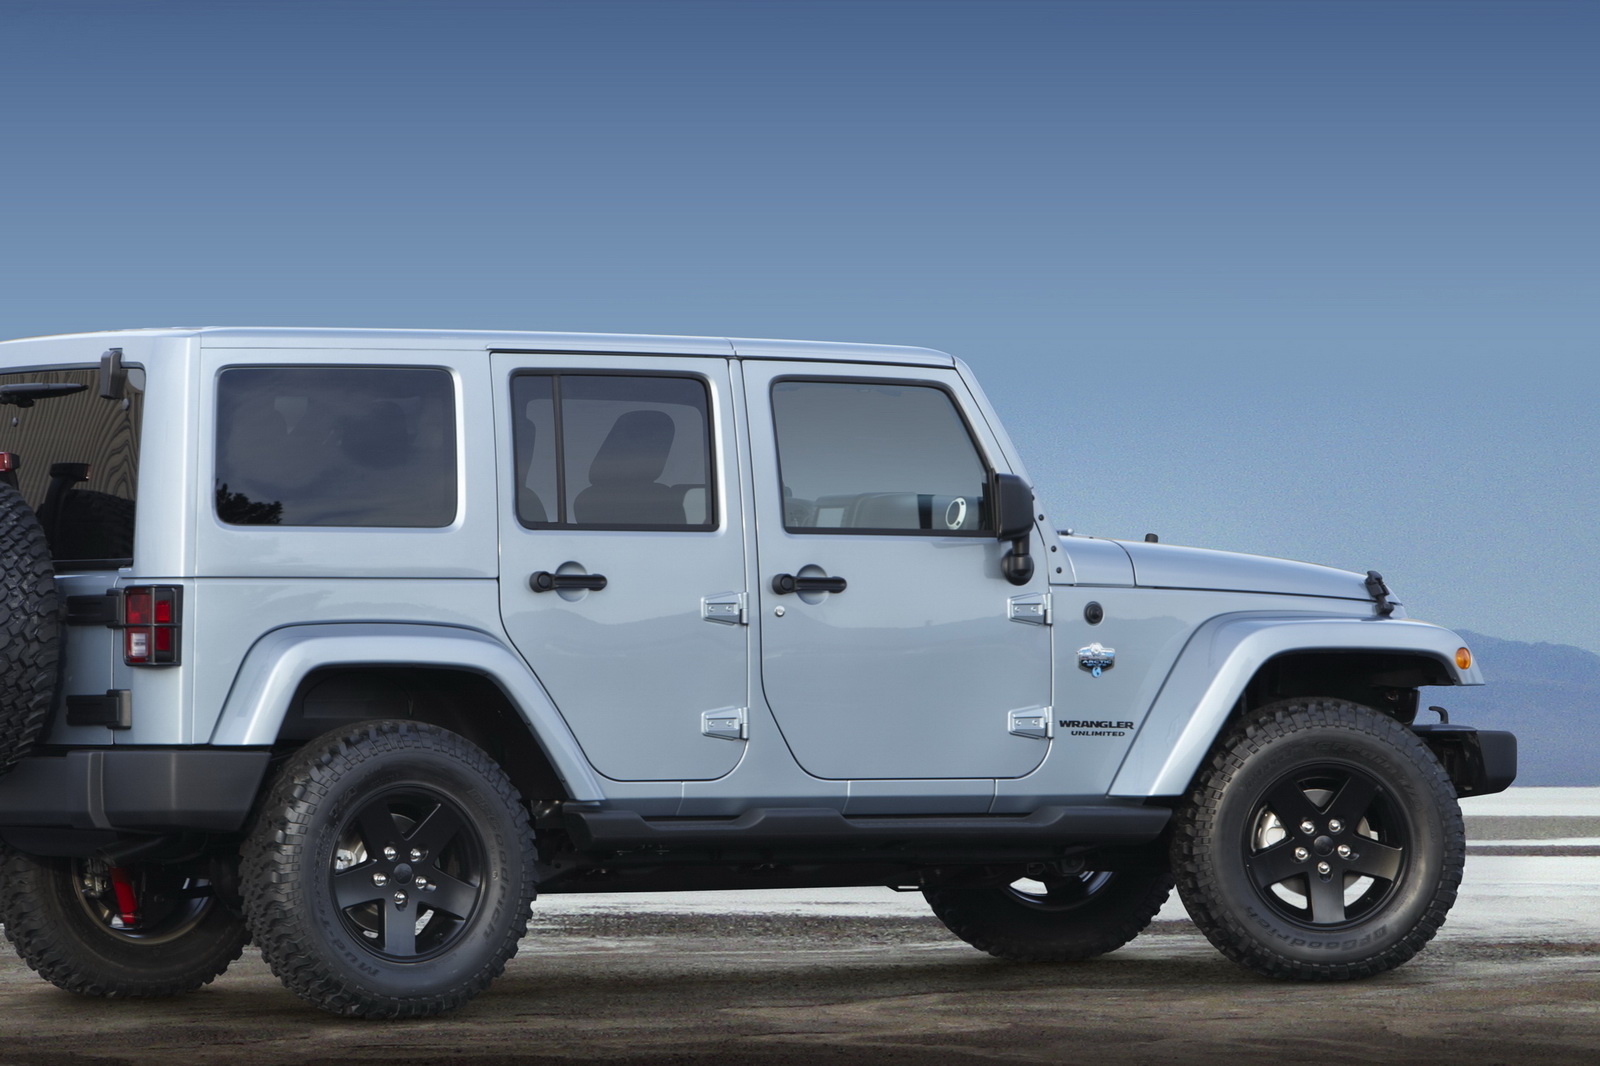 Jeep Reveals New Arctic Editions of 2012 Wrangler and Liberty SUV |  Carscoops